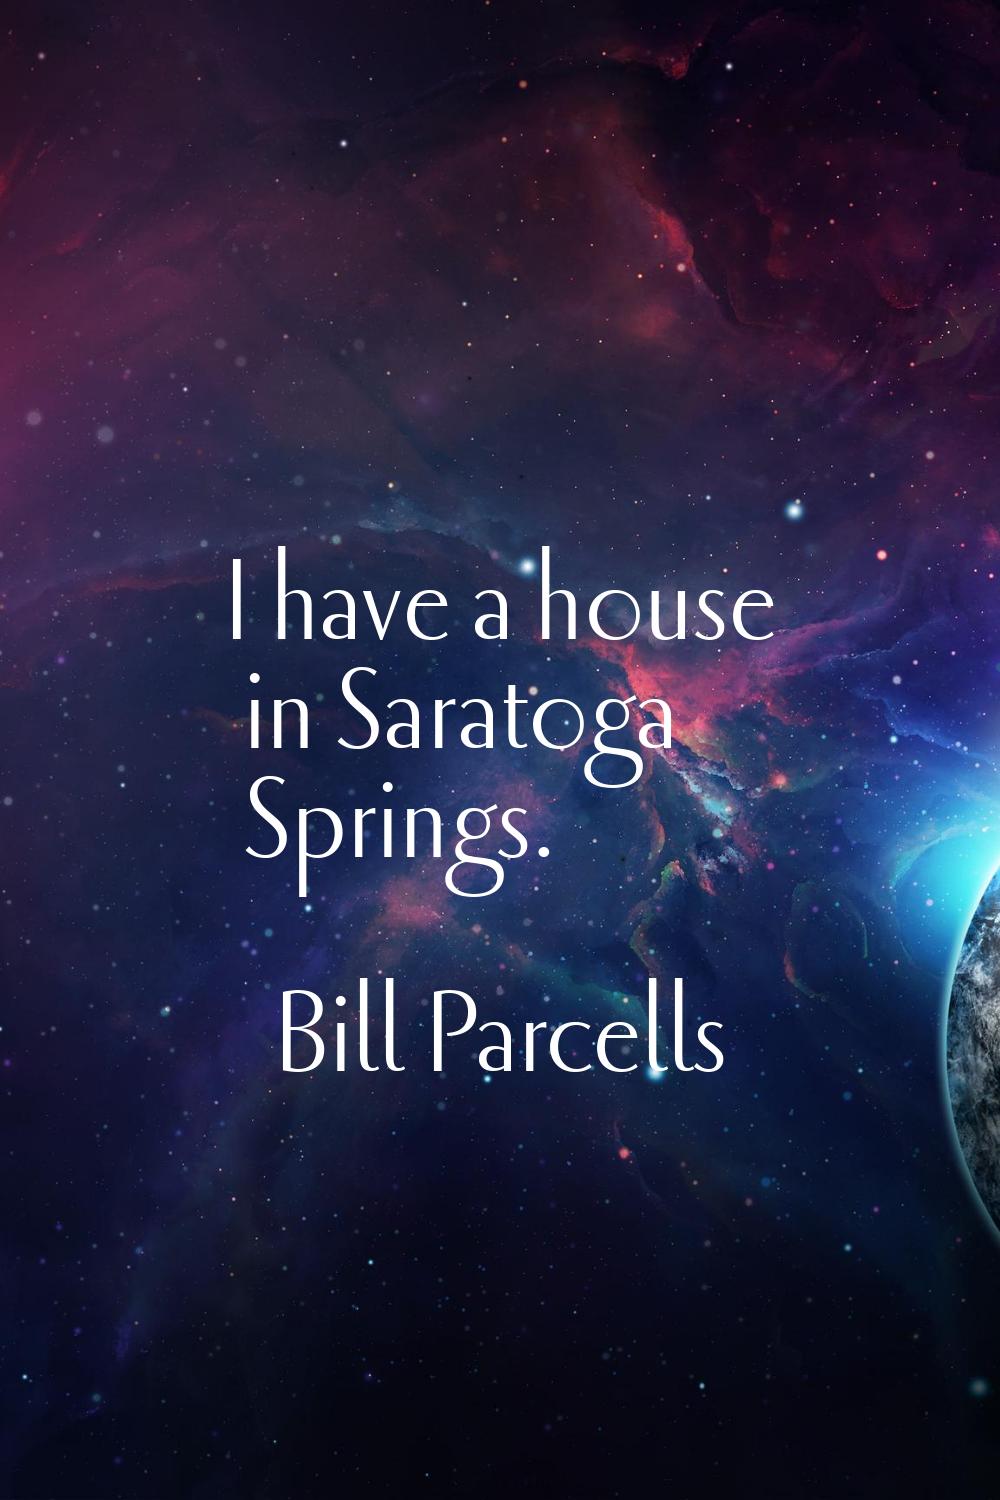 I have a house in Saratoga Springs.